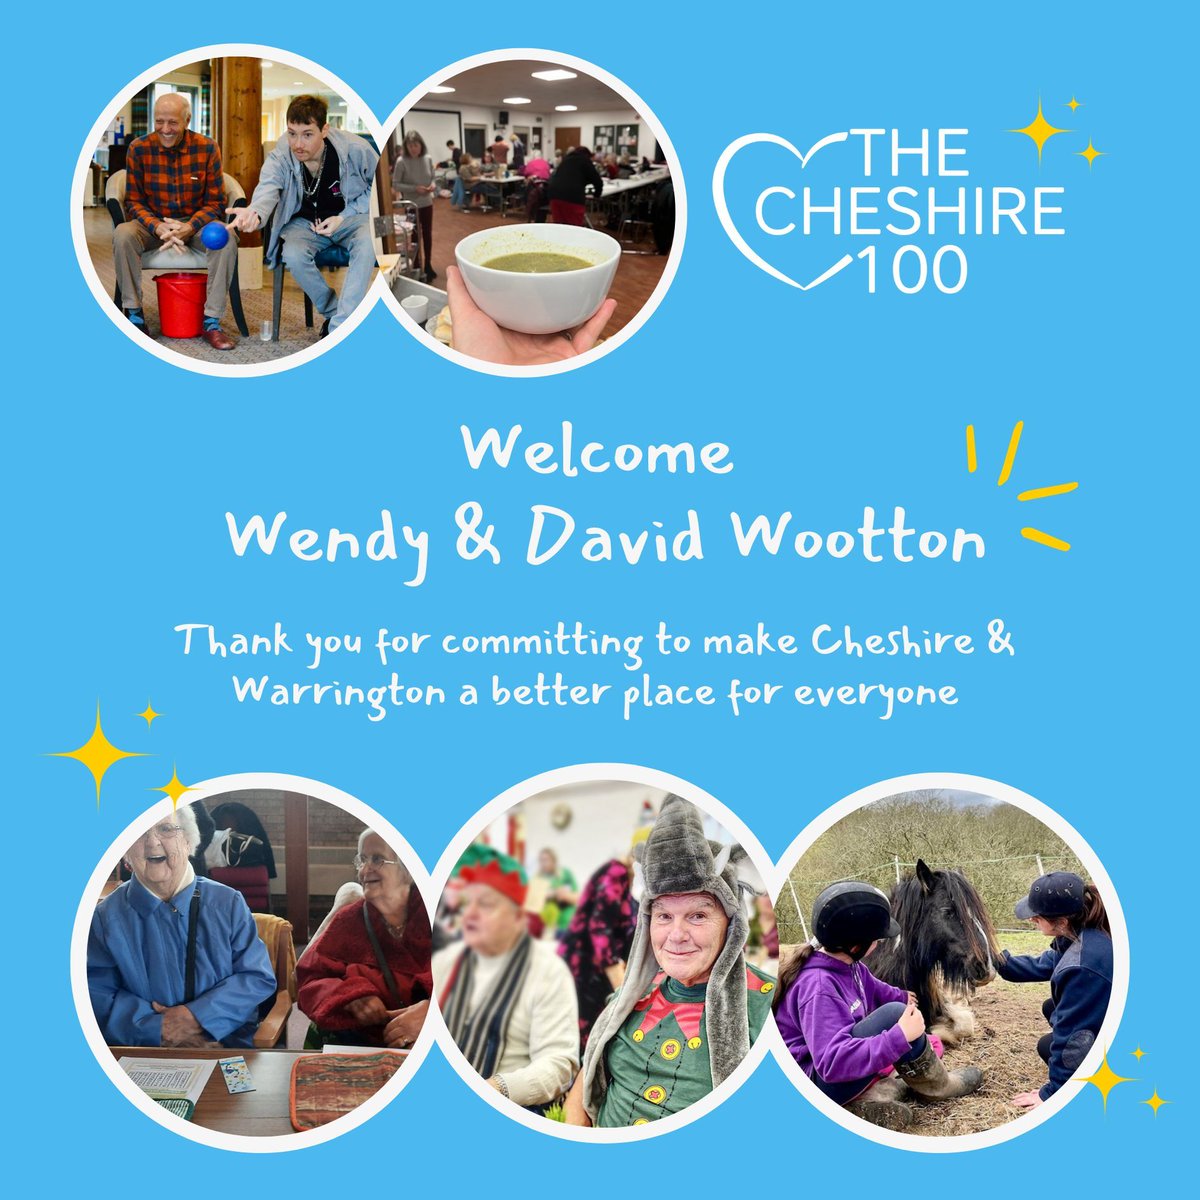 Welcome to the Cheshire 100 Supporters Club! Our individual donors allow CCF to build a happier, fairer and stronger county for all. Thank you so much for your support ⭐ Find out more - buff.ly/3CREKEq #CCF #Cheshire